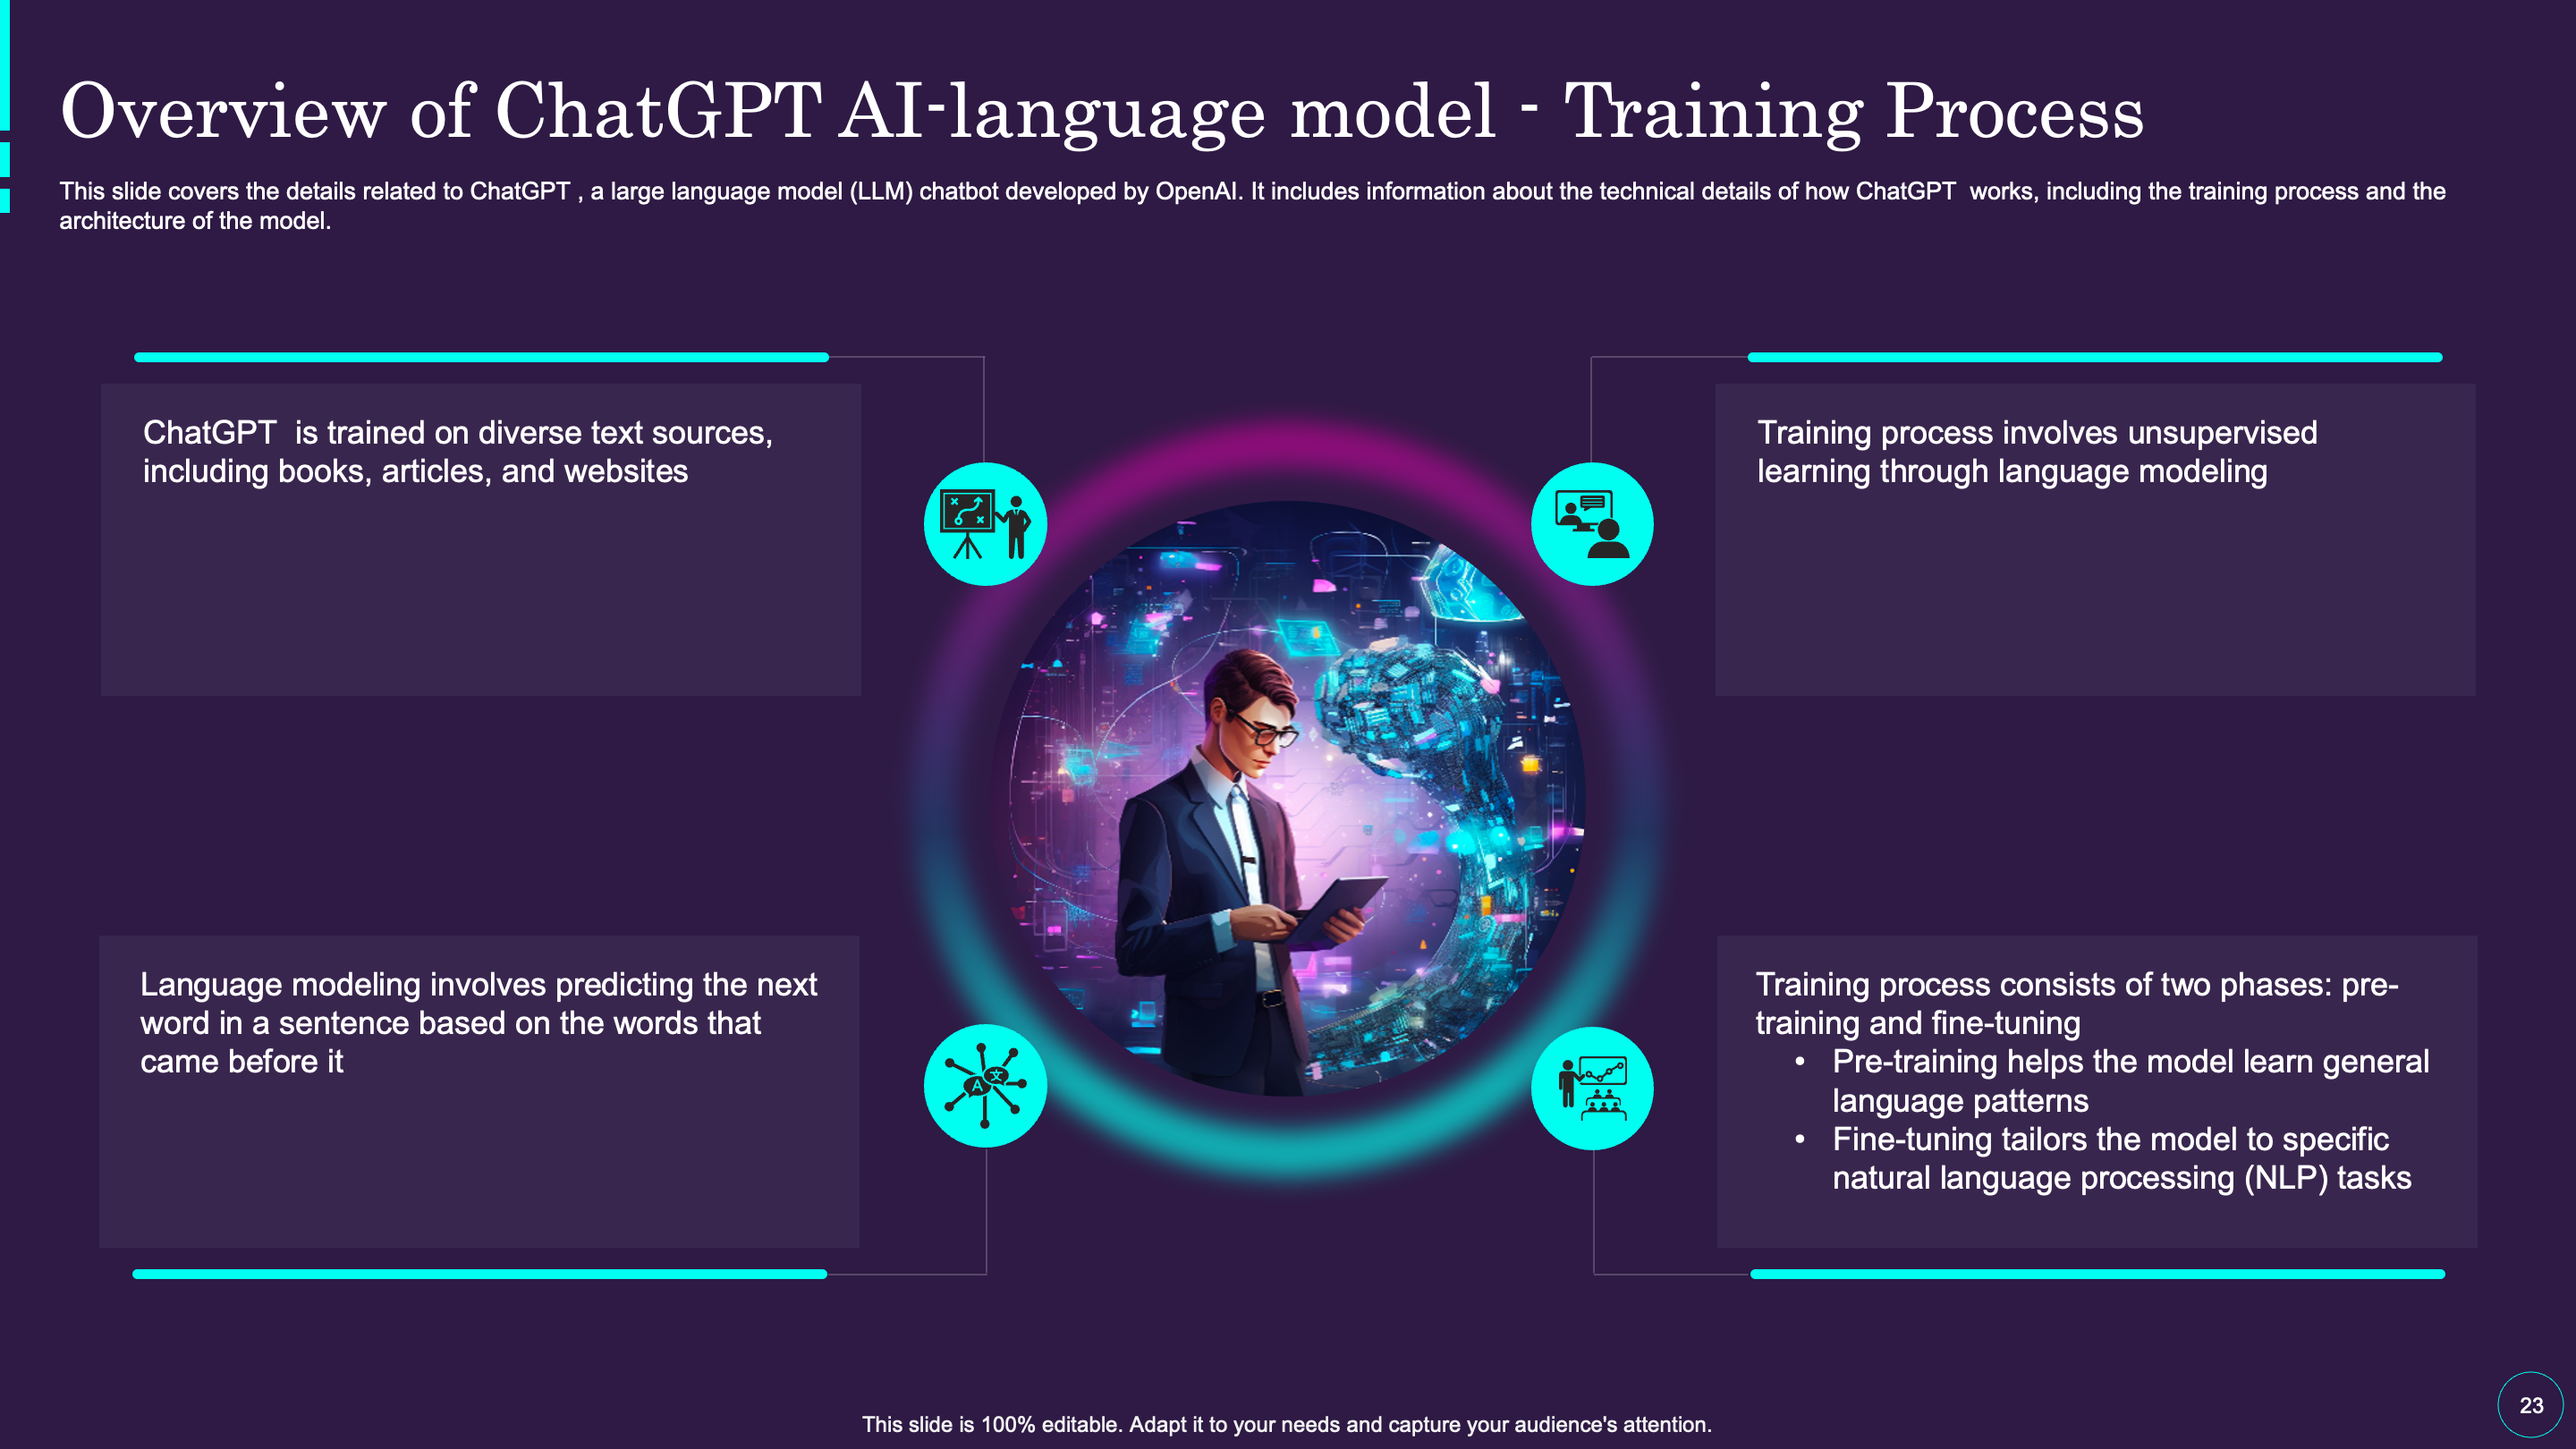 Overview of ChatGPT AI-language model - Training Process